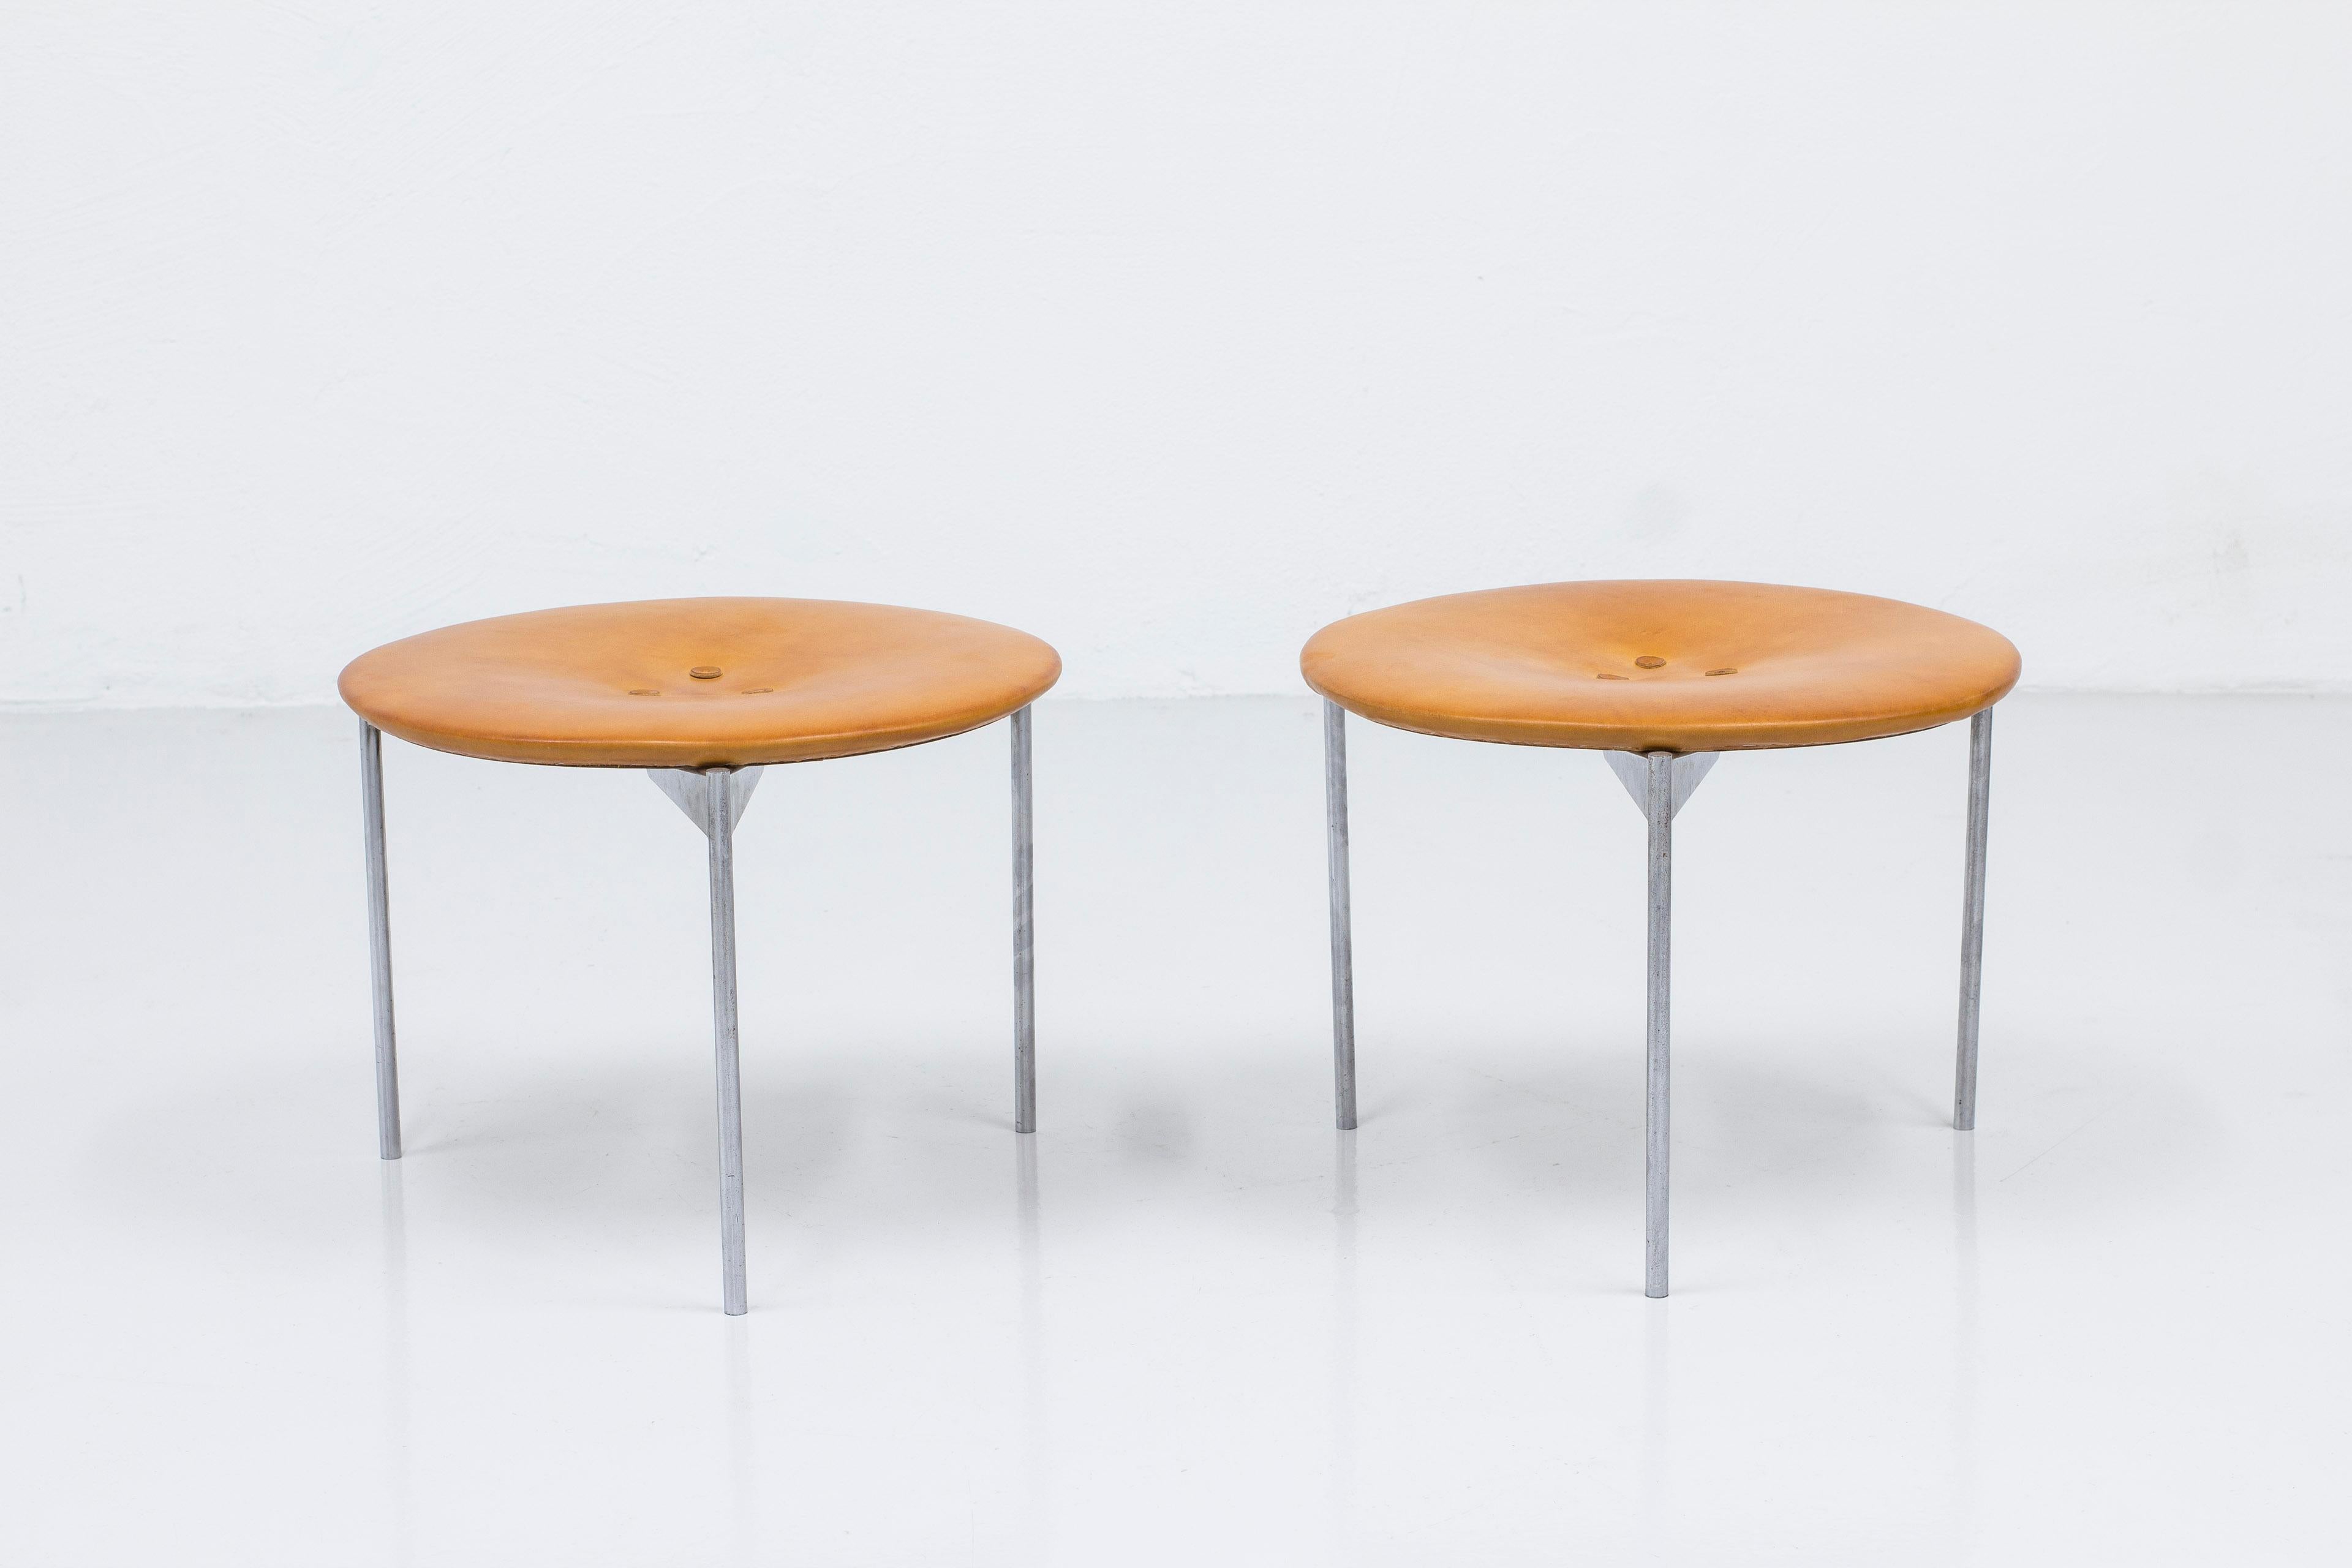 Stainless Steel Patinated leather and Steel Stools by Uno & Östen Kristiansson, Sweden, 1960s For Sale